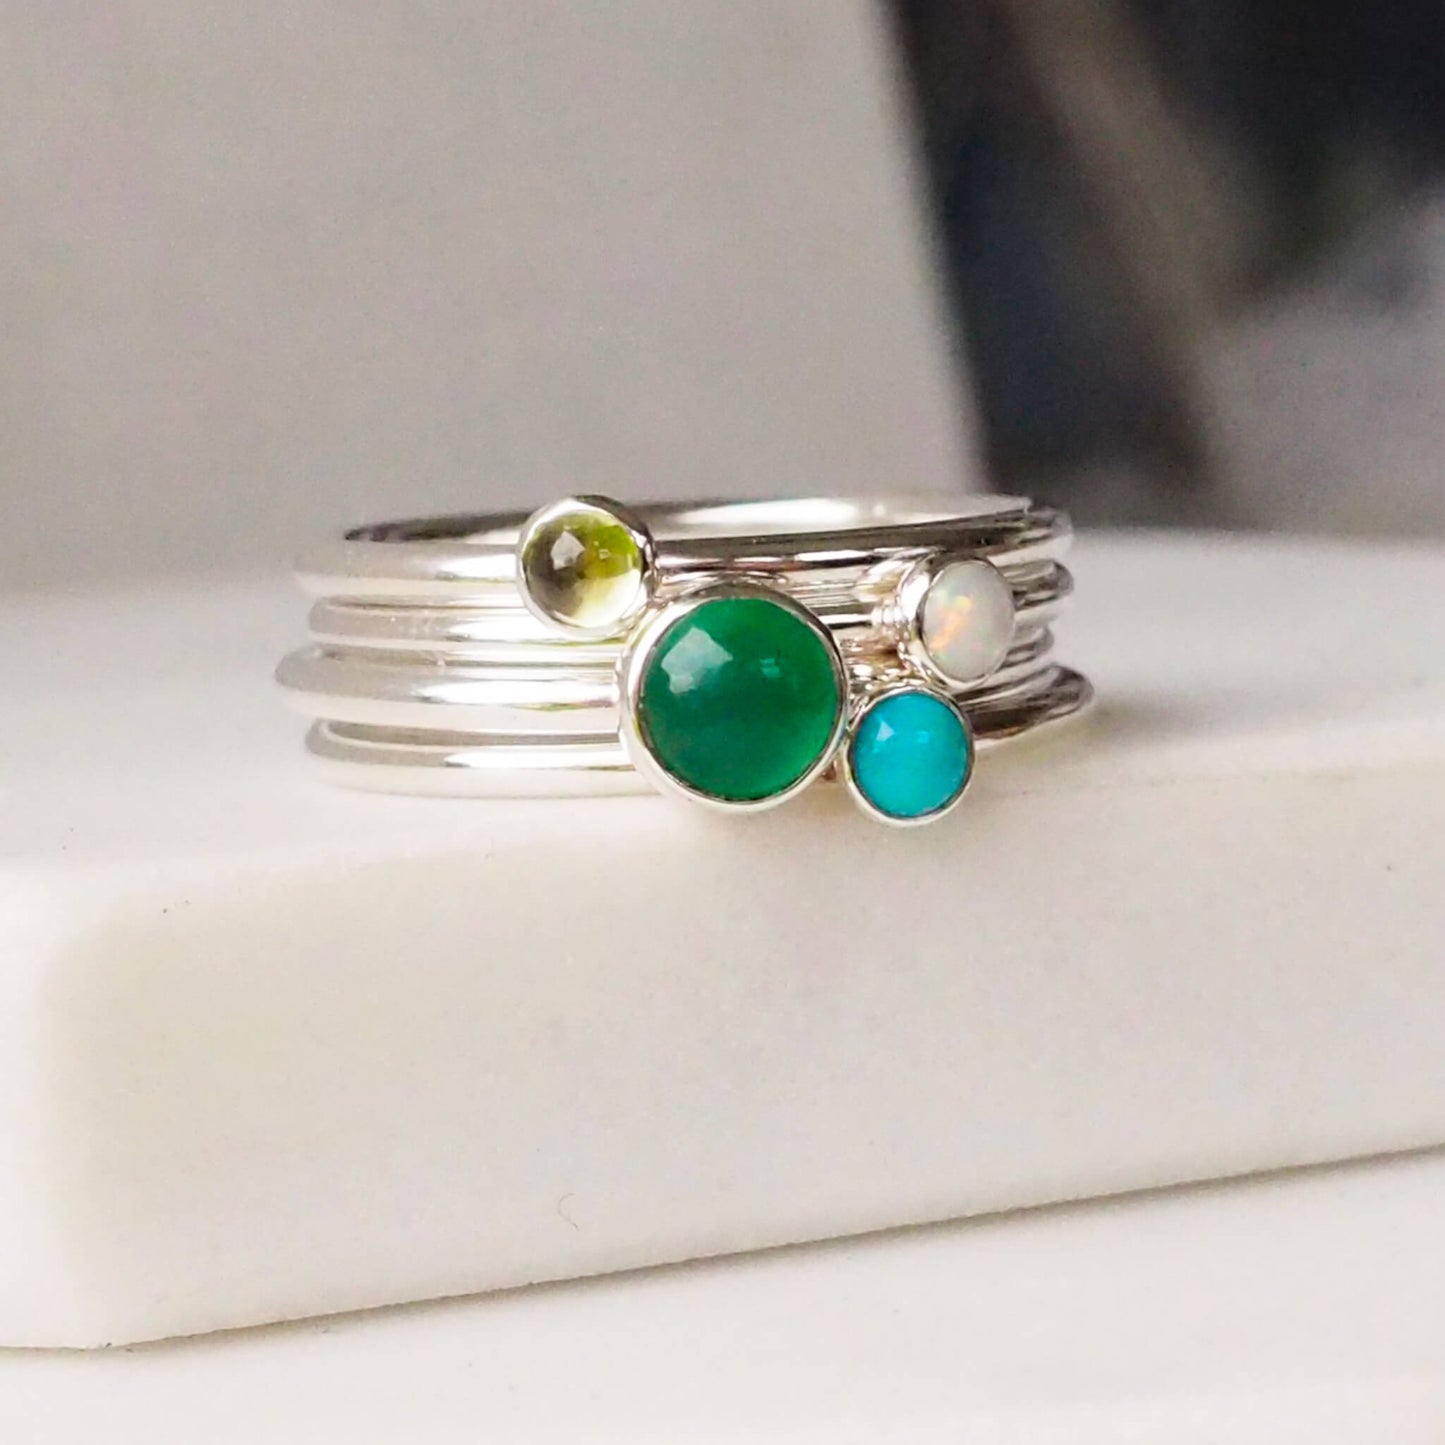 Four rings with the birthstones for May, December, August and October as as a four ring set made by maram jewellery